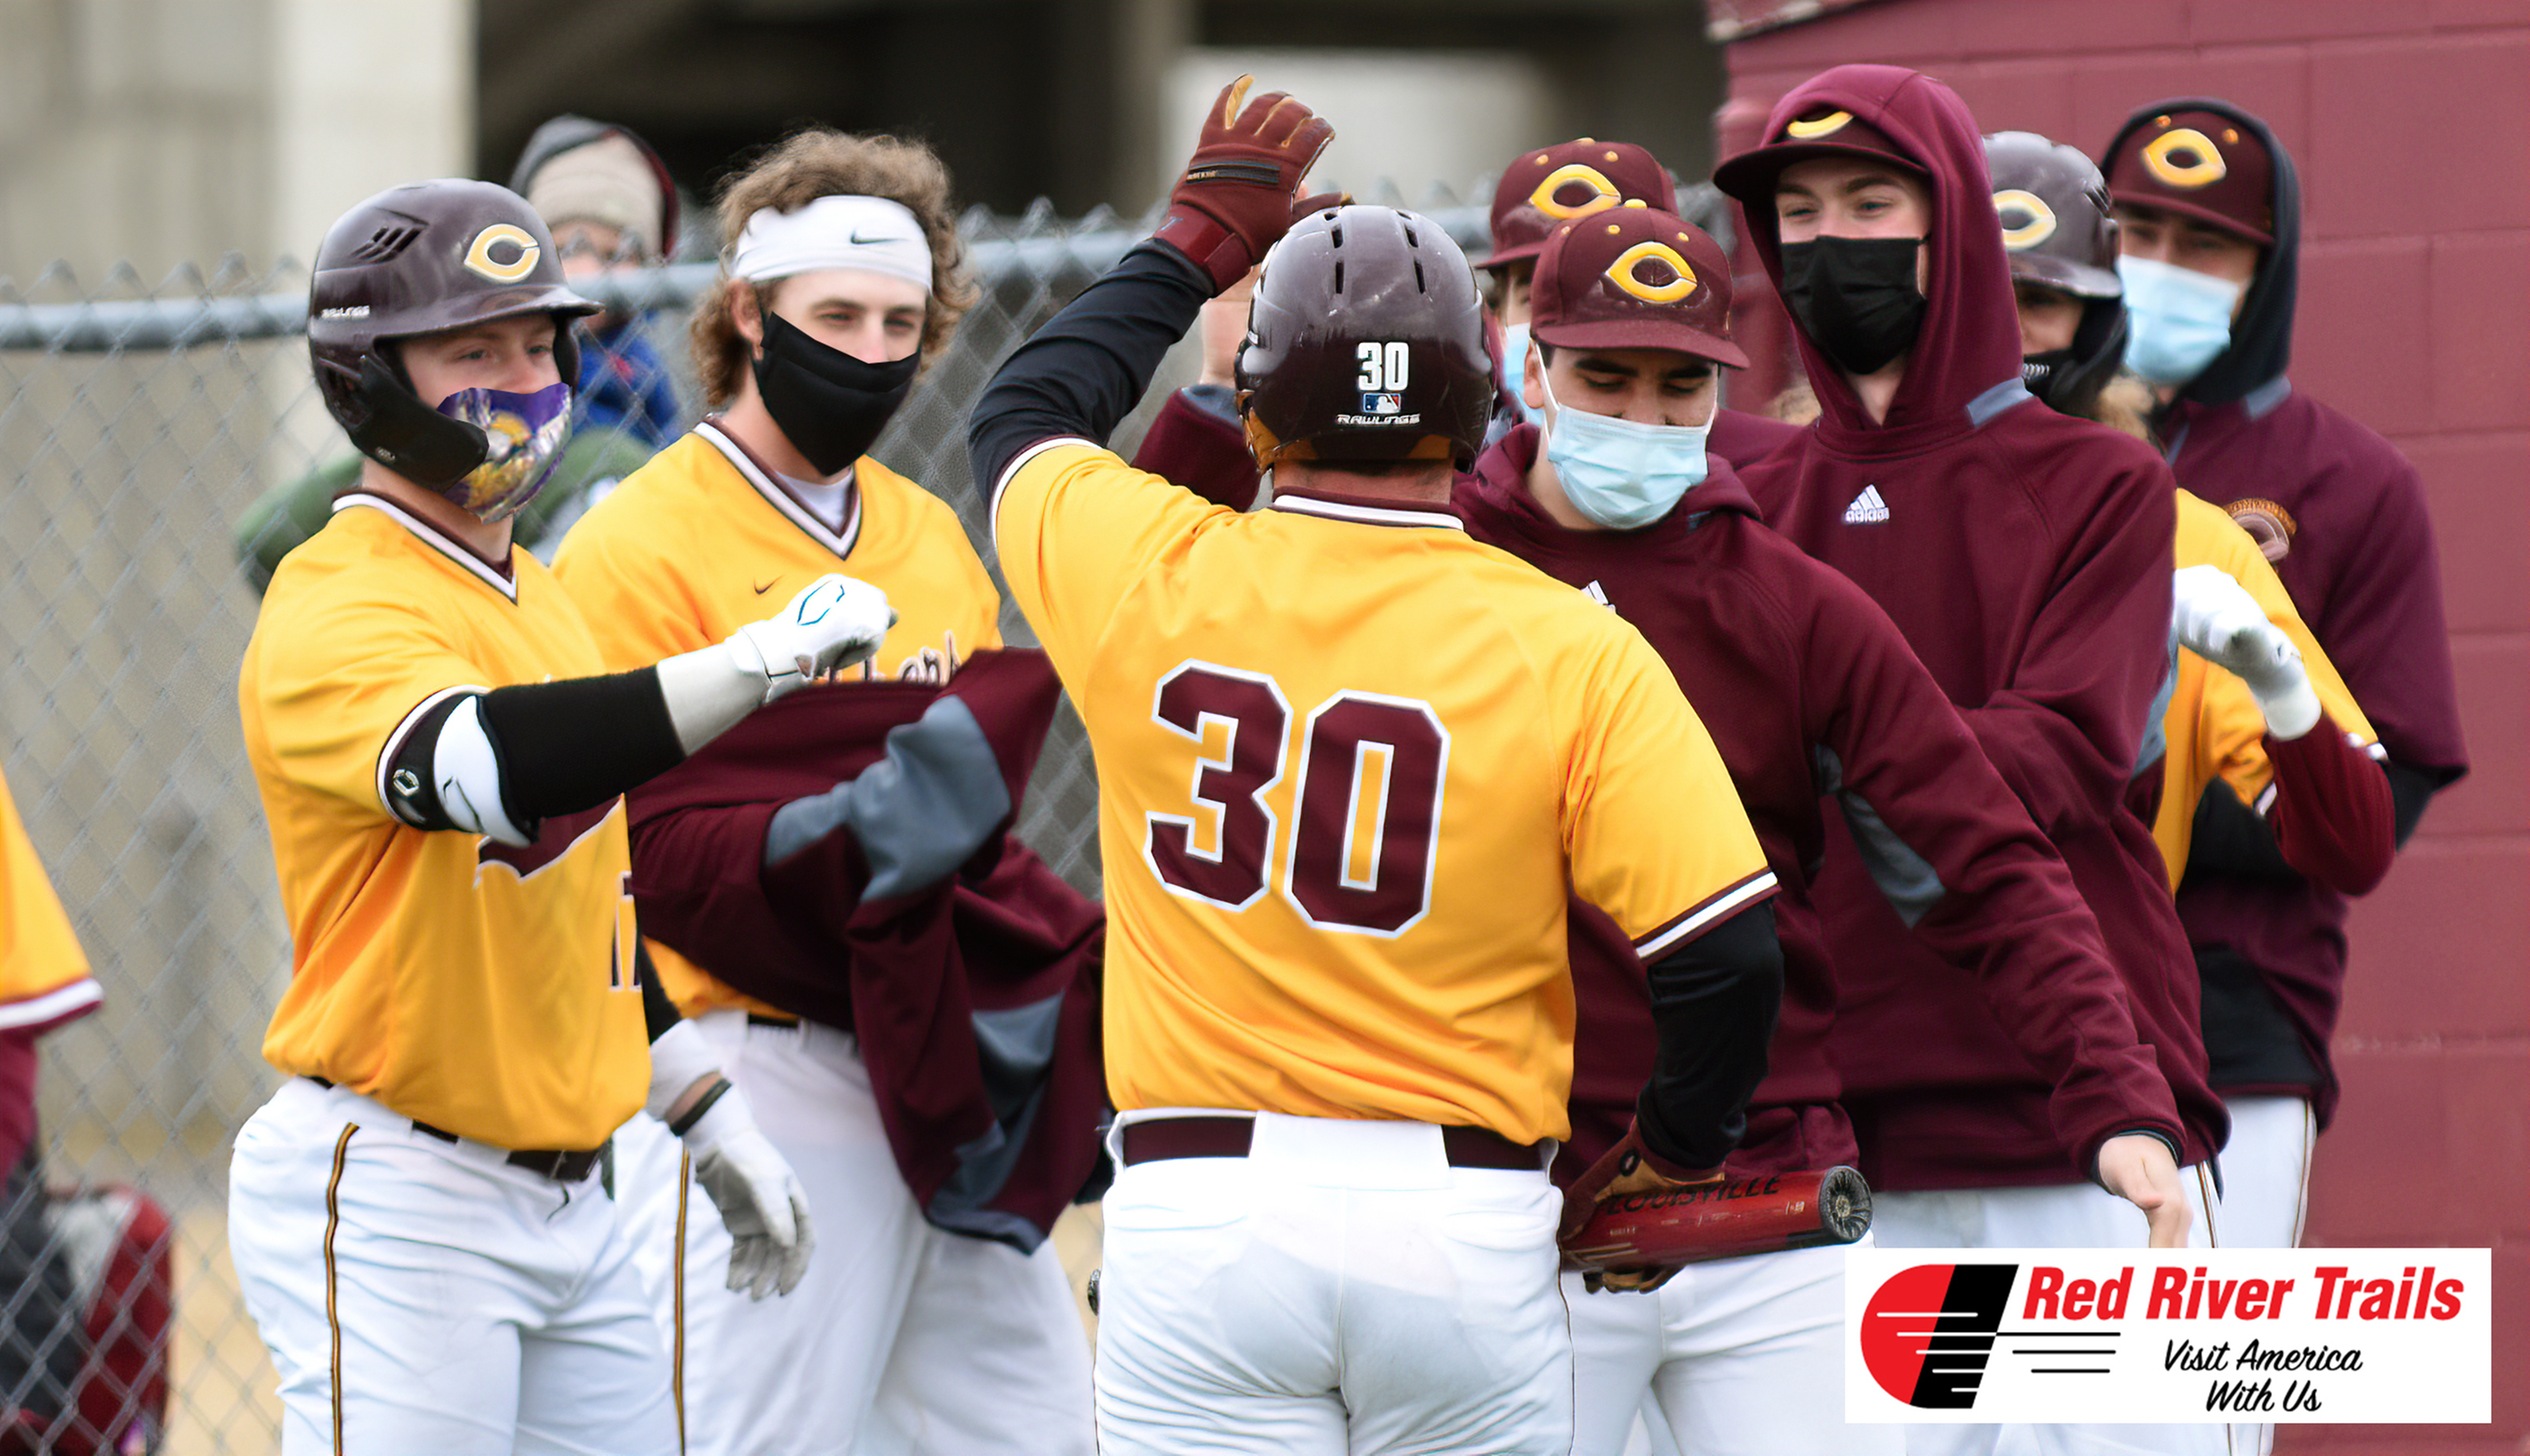 Concordia scored nine runs and clouted 16 hits in their MIAC-opening win over Hamline. Canaan Fagerland (#30) went 2-for-5 and drove in a run.